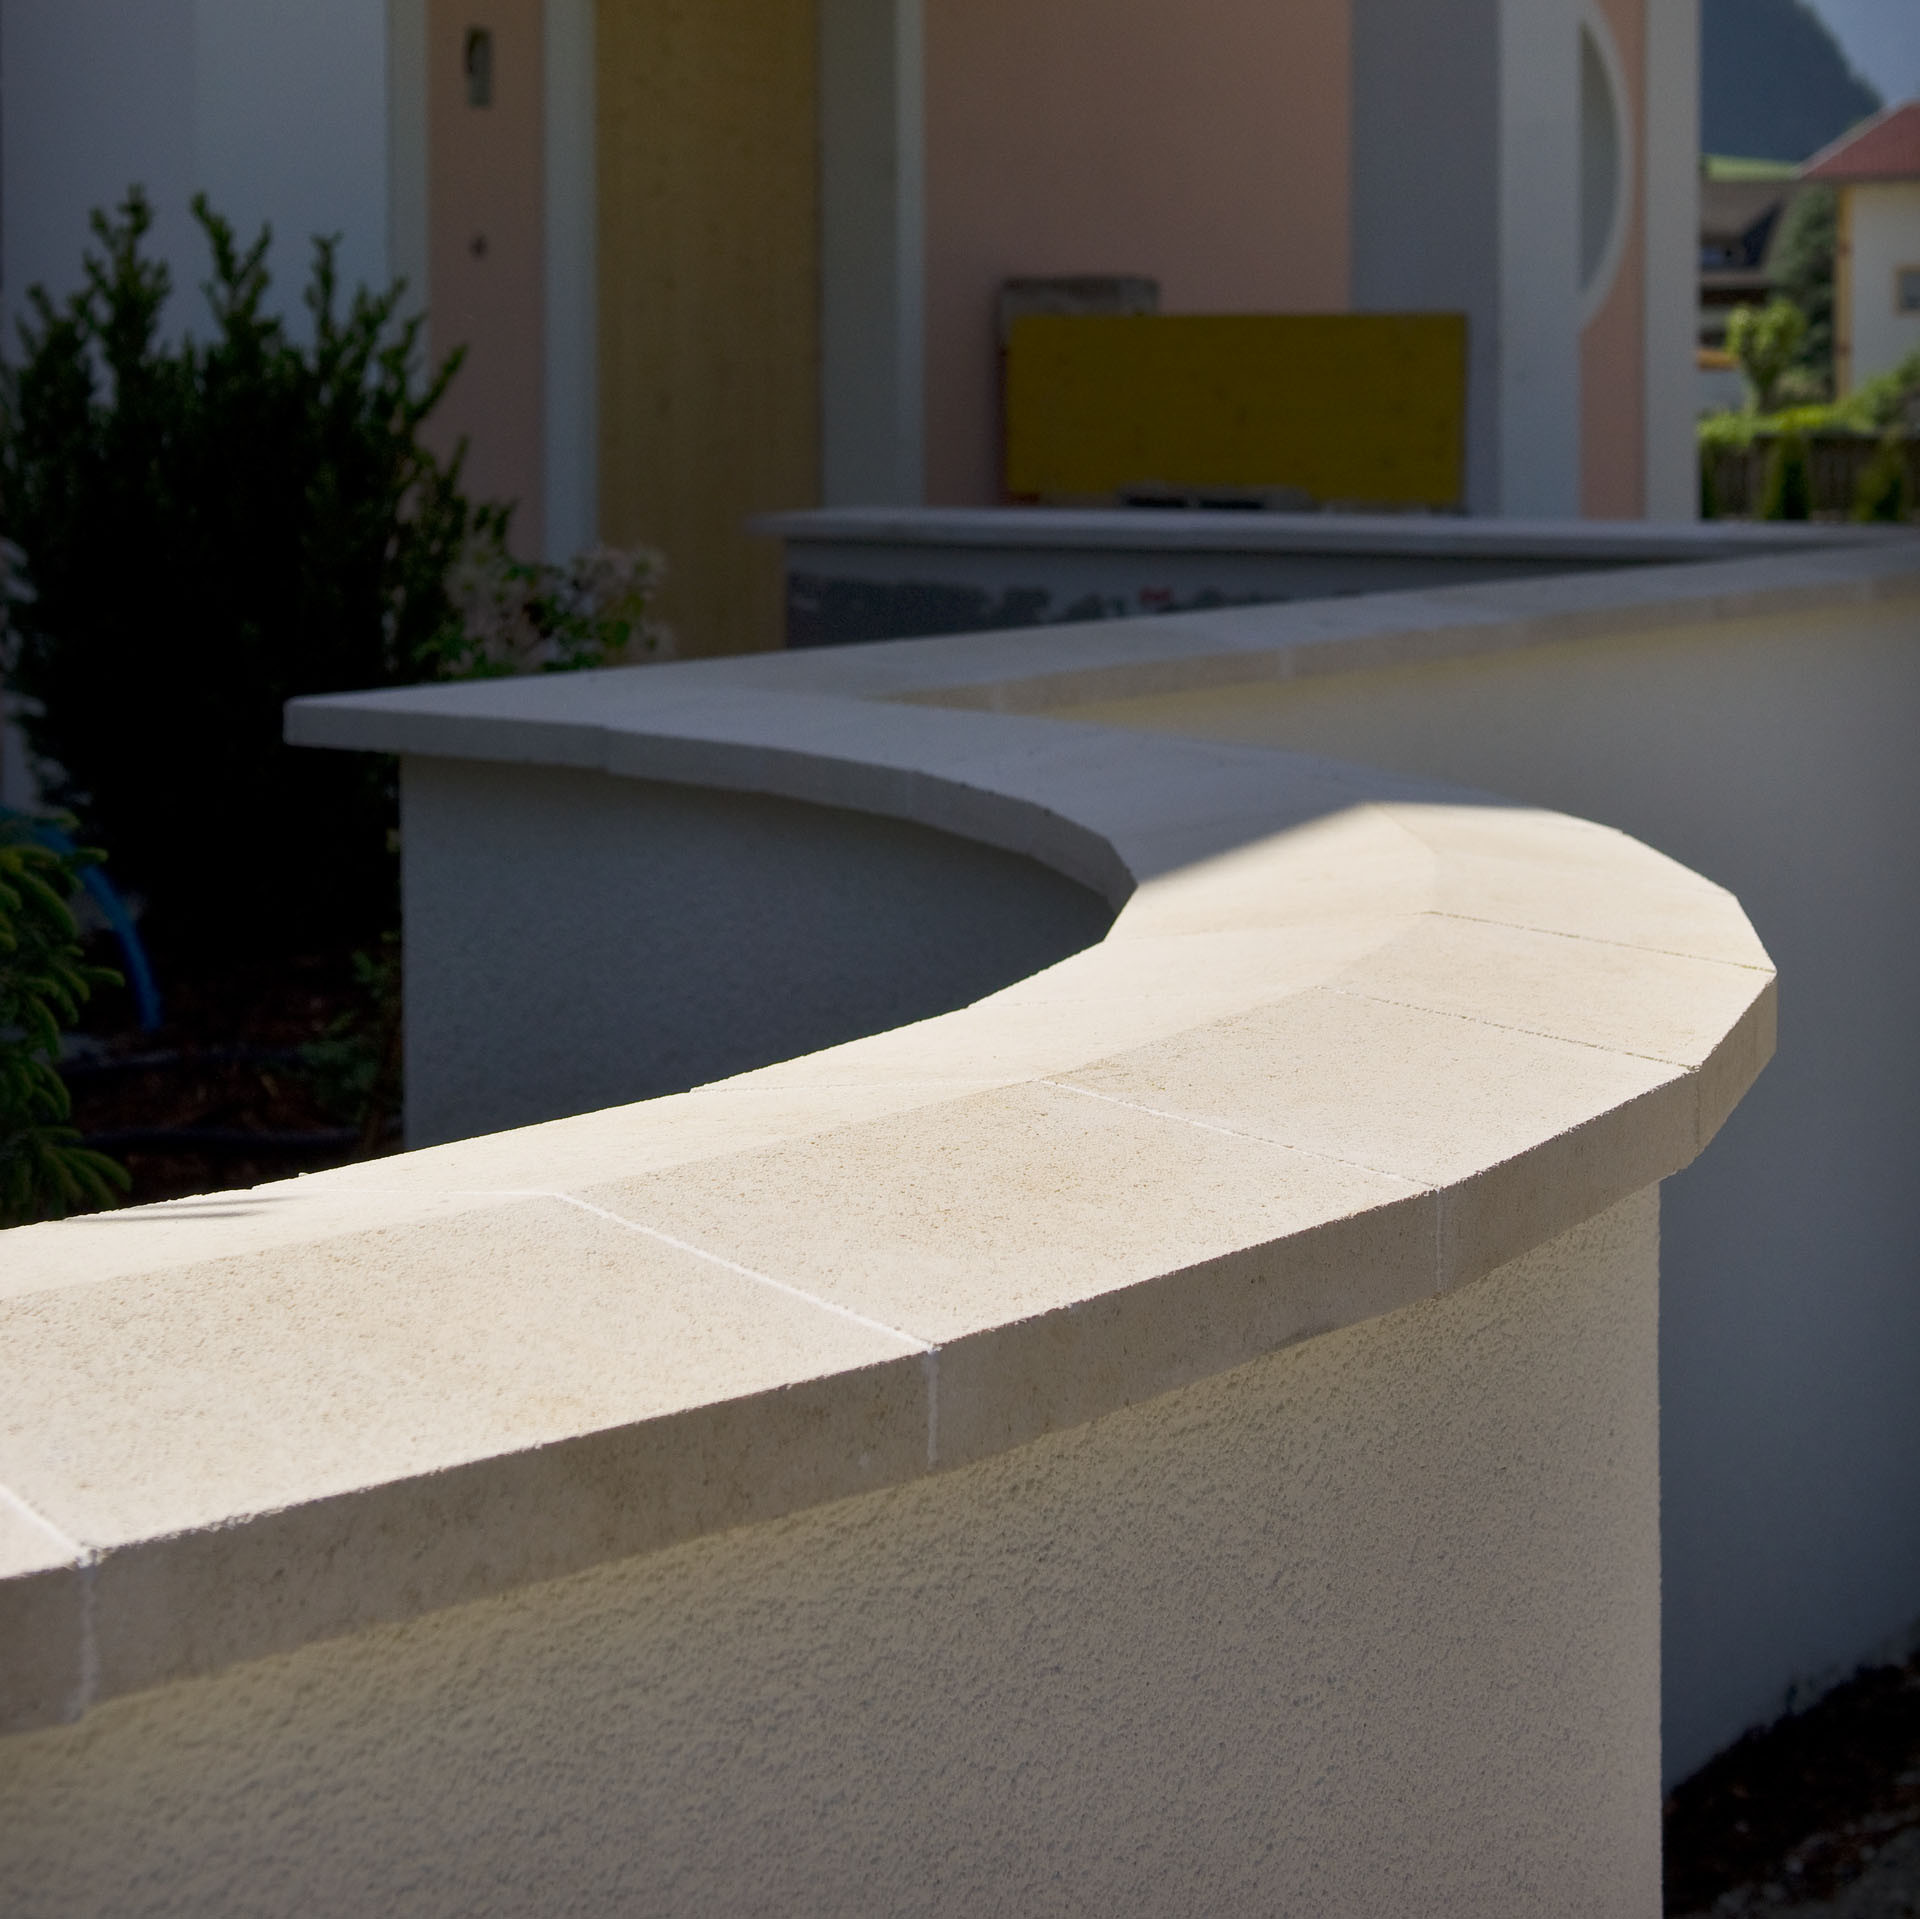 Double-Beveled Stone Wall Coping